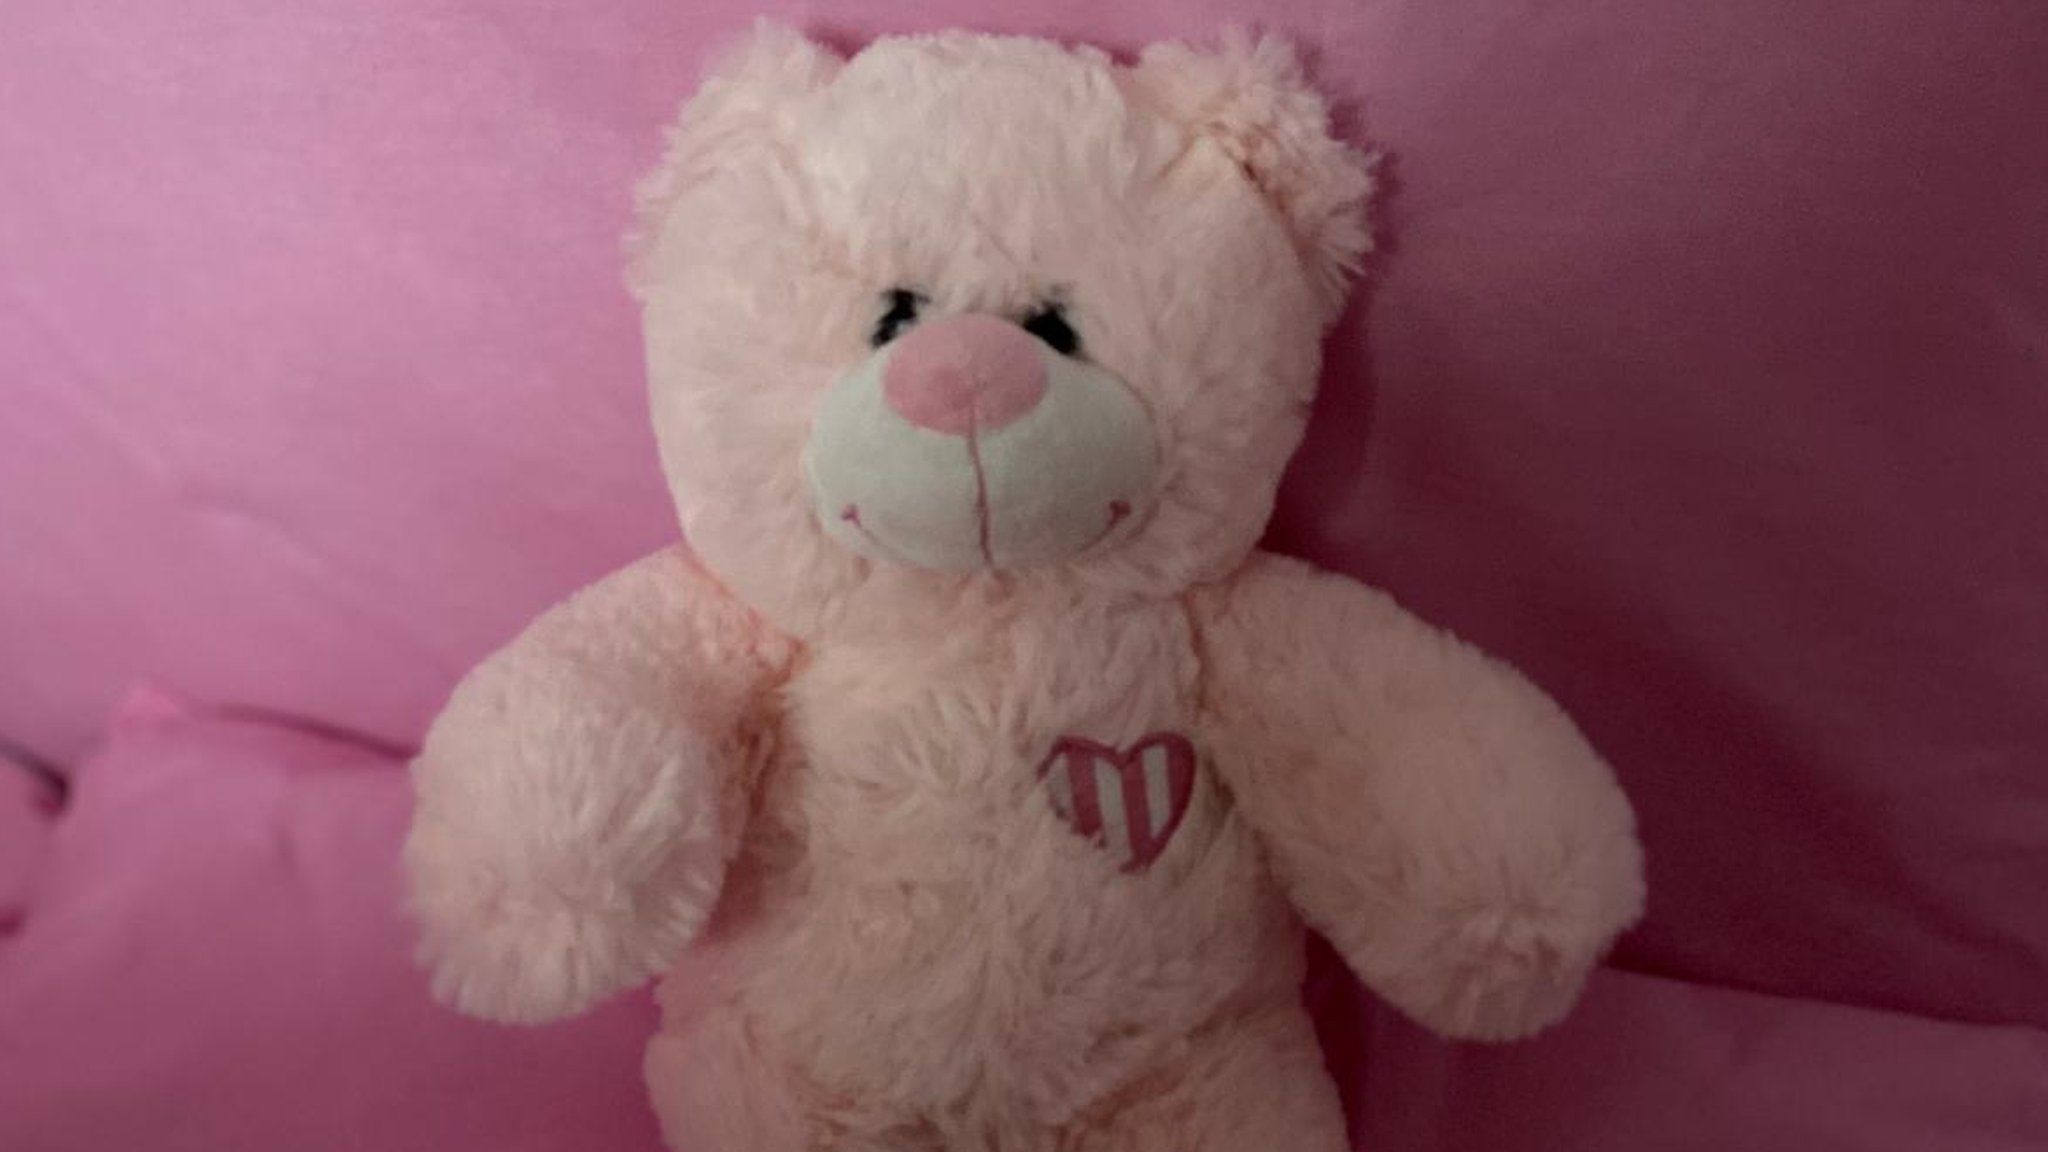 Private baby scan teddy bear